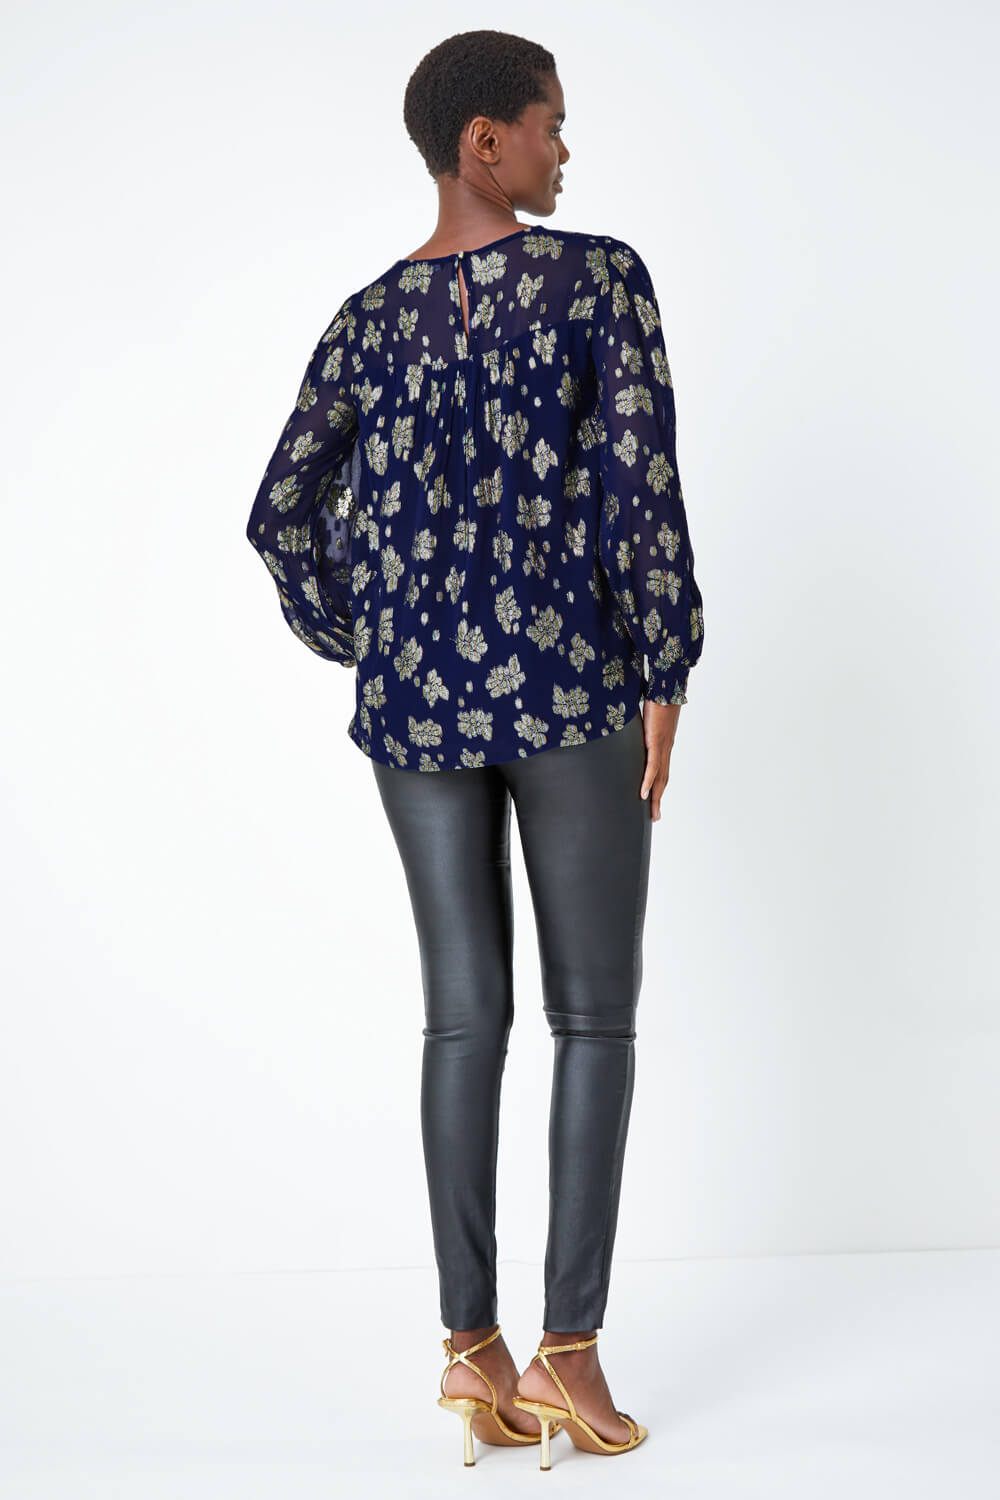 Midnight Blue Metallic Floral Print Ladder Lace Top, Image 4 of 5